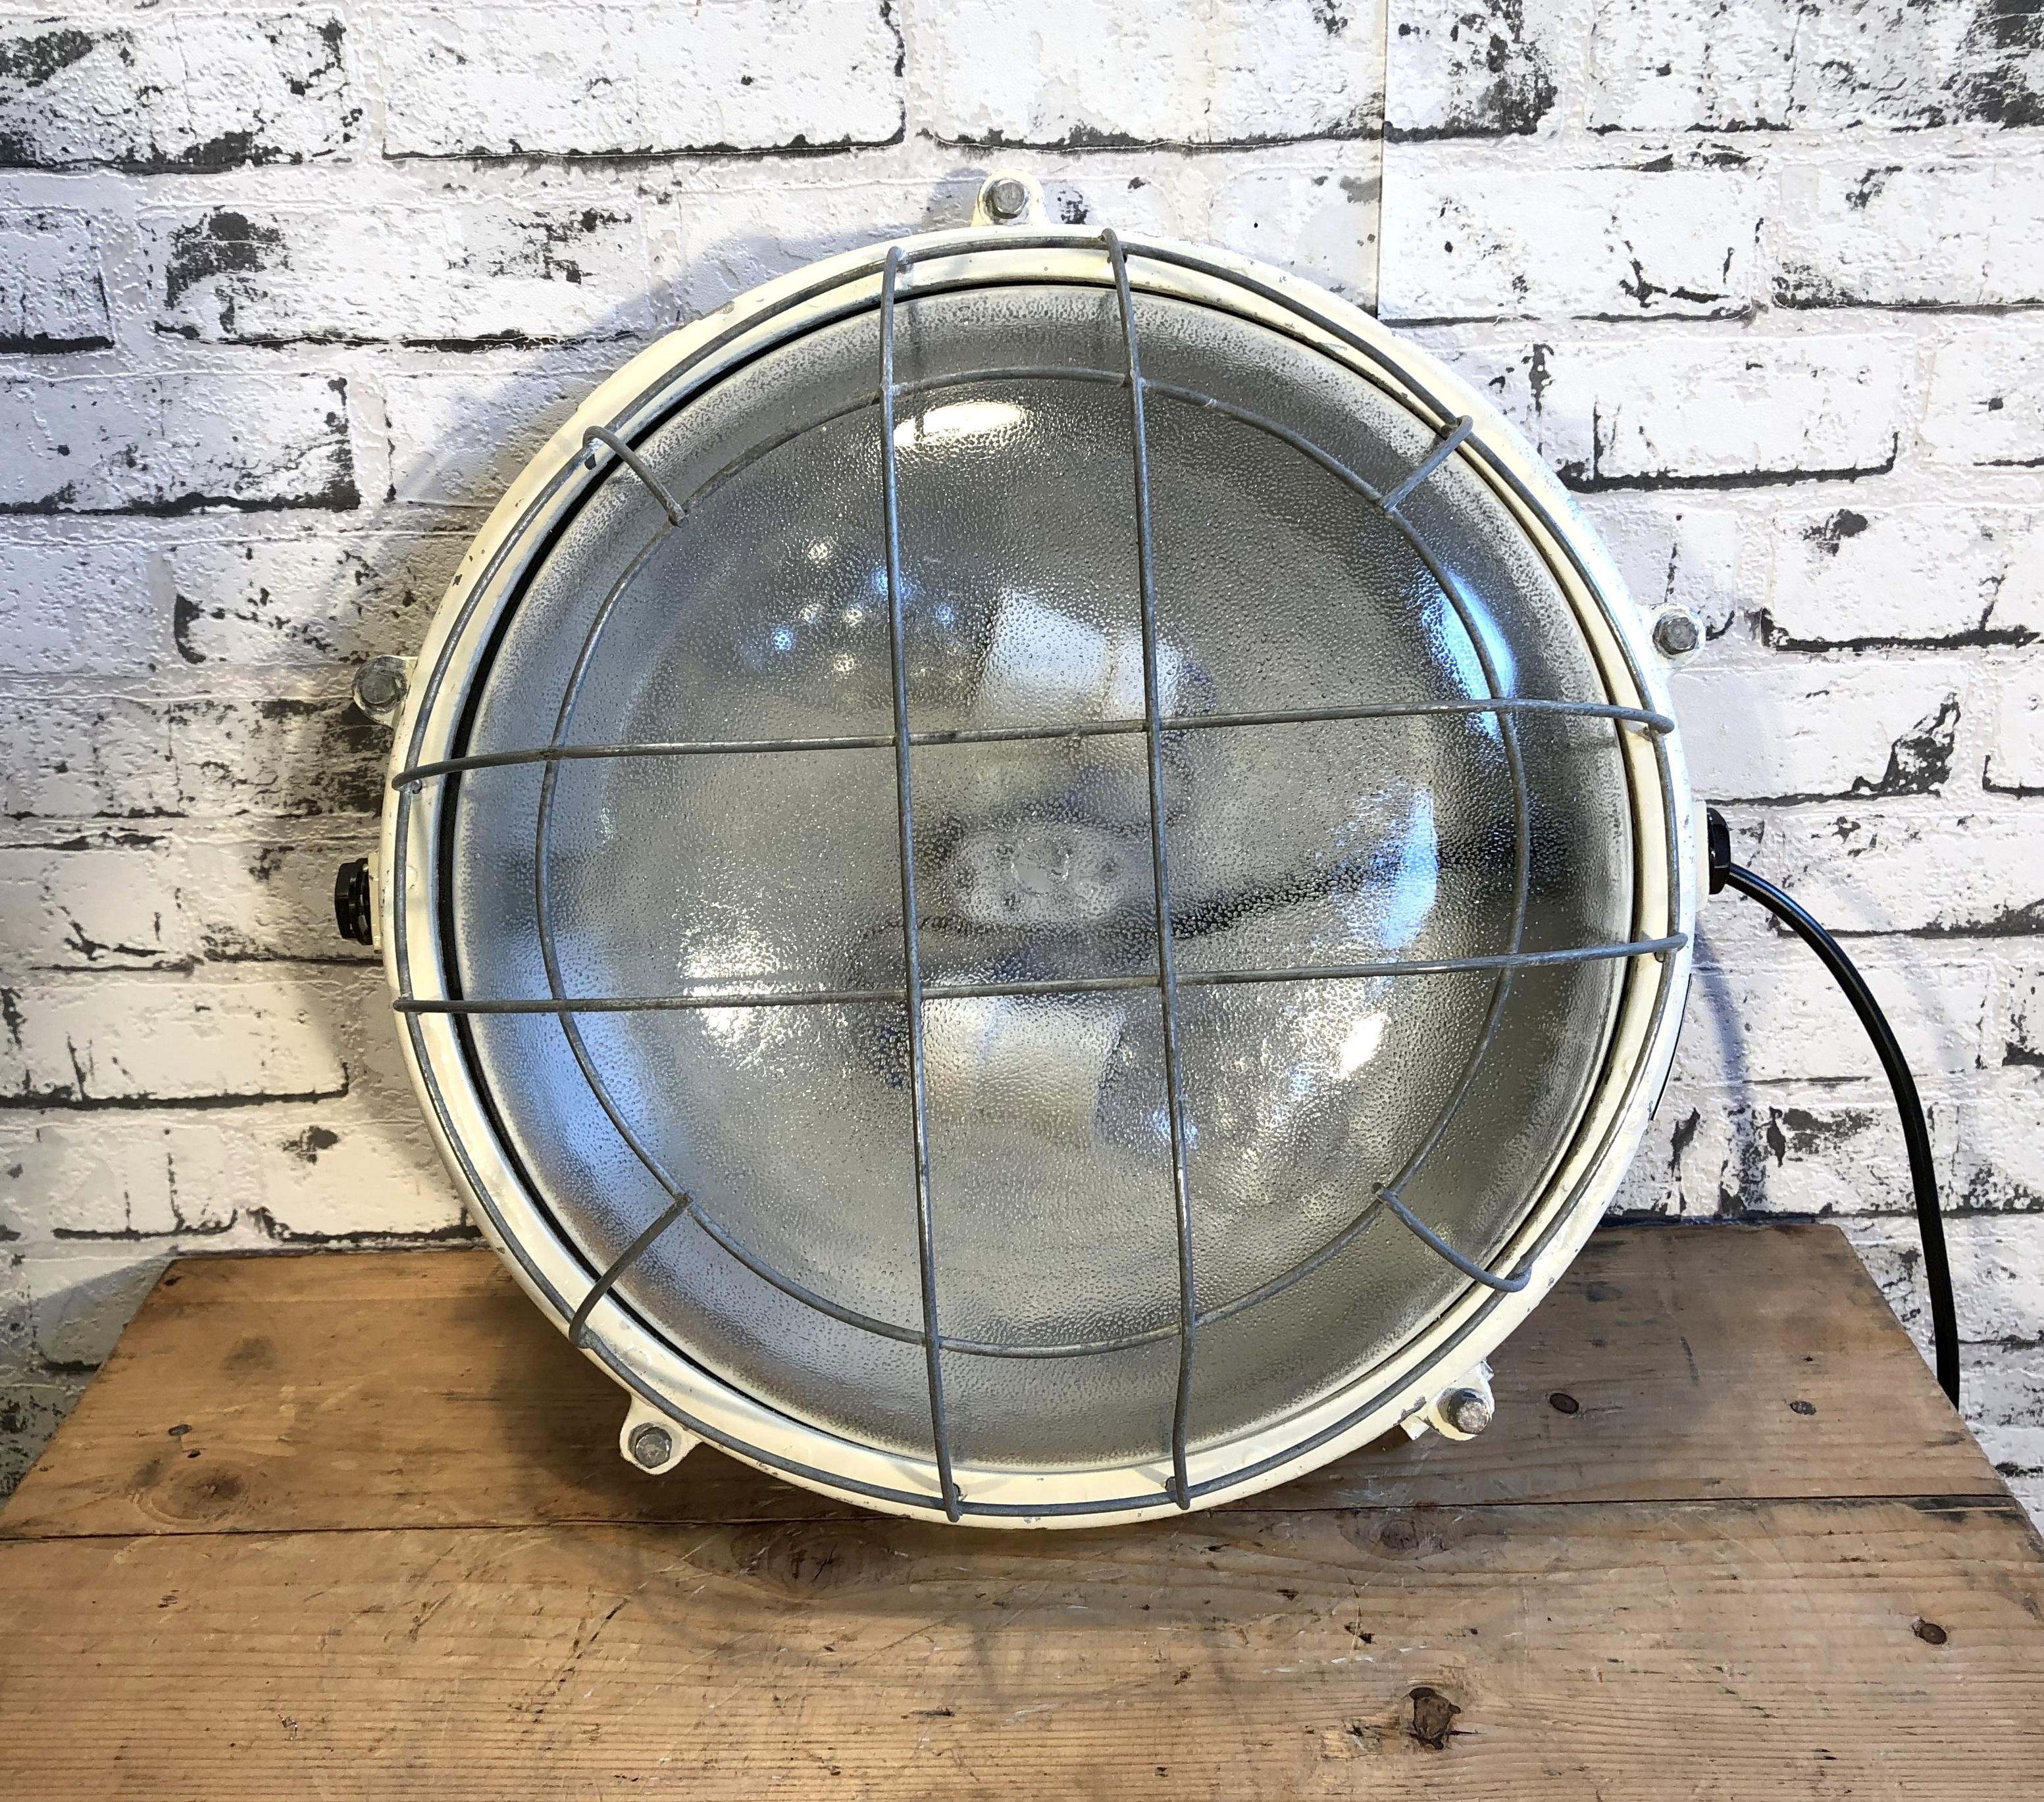 This cast aluminium wall lamp was made by Elektrosvit in former Czechoslovakia during the 1970s.It features cast aluminium body, a frosted curved glass and a steel grid. It can also be used as a ceiling lamp. It has two porcelain sockets for E 27